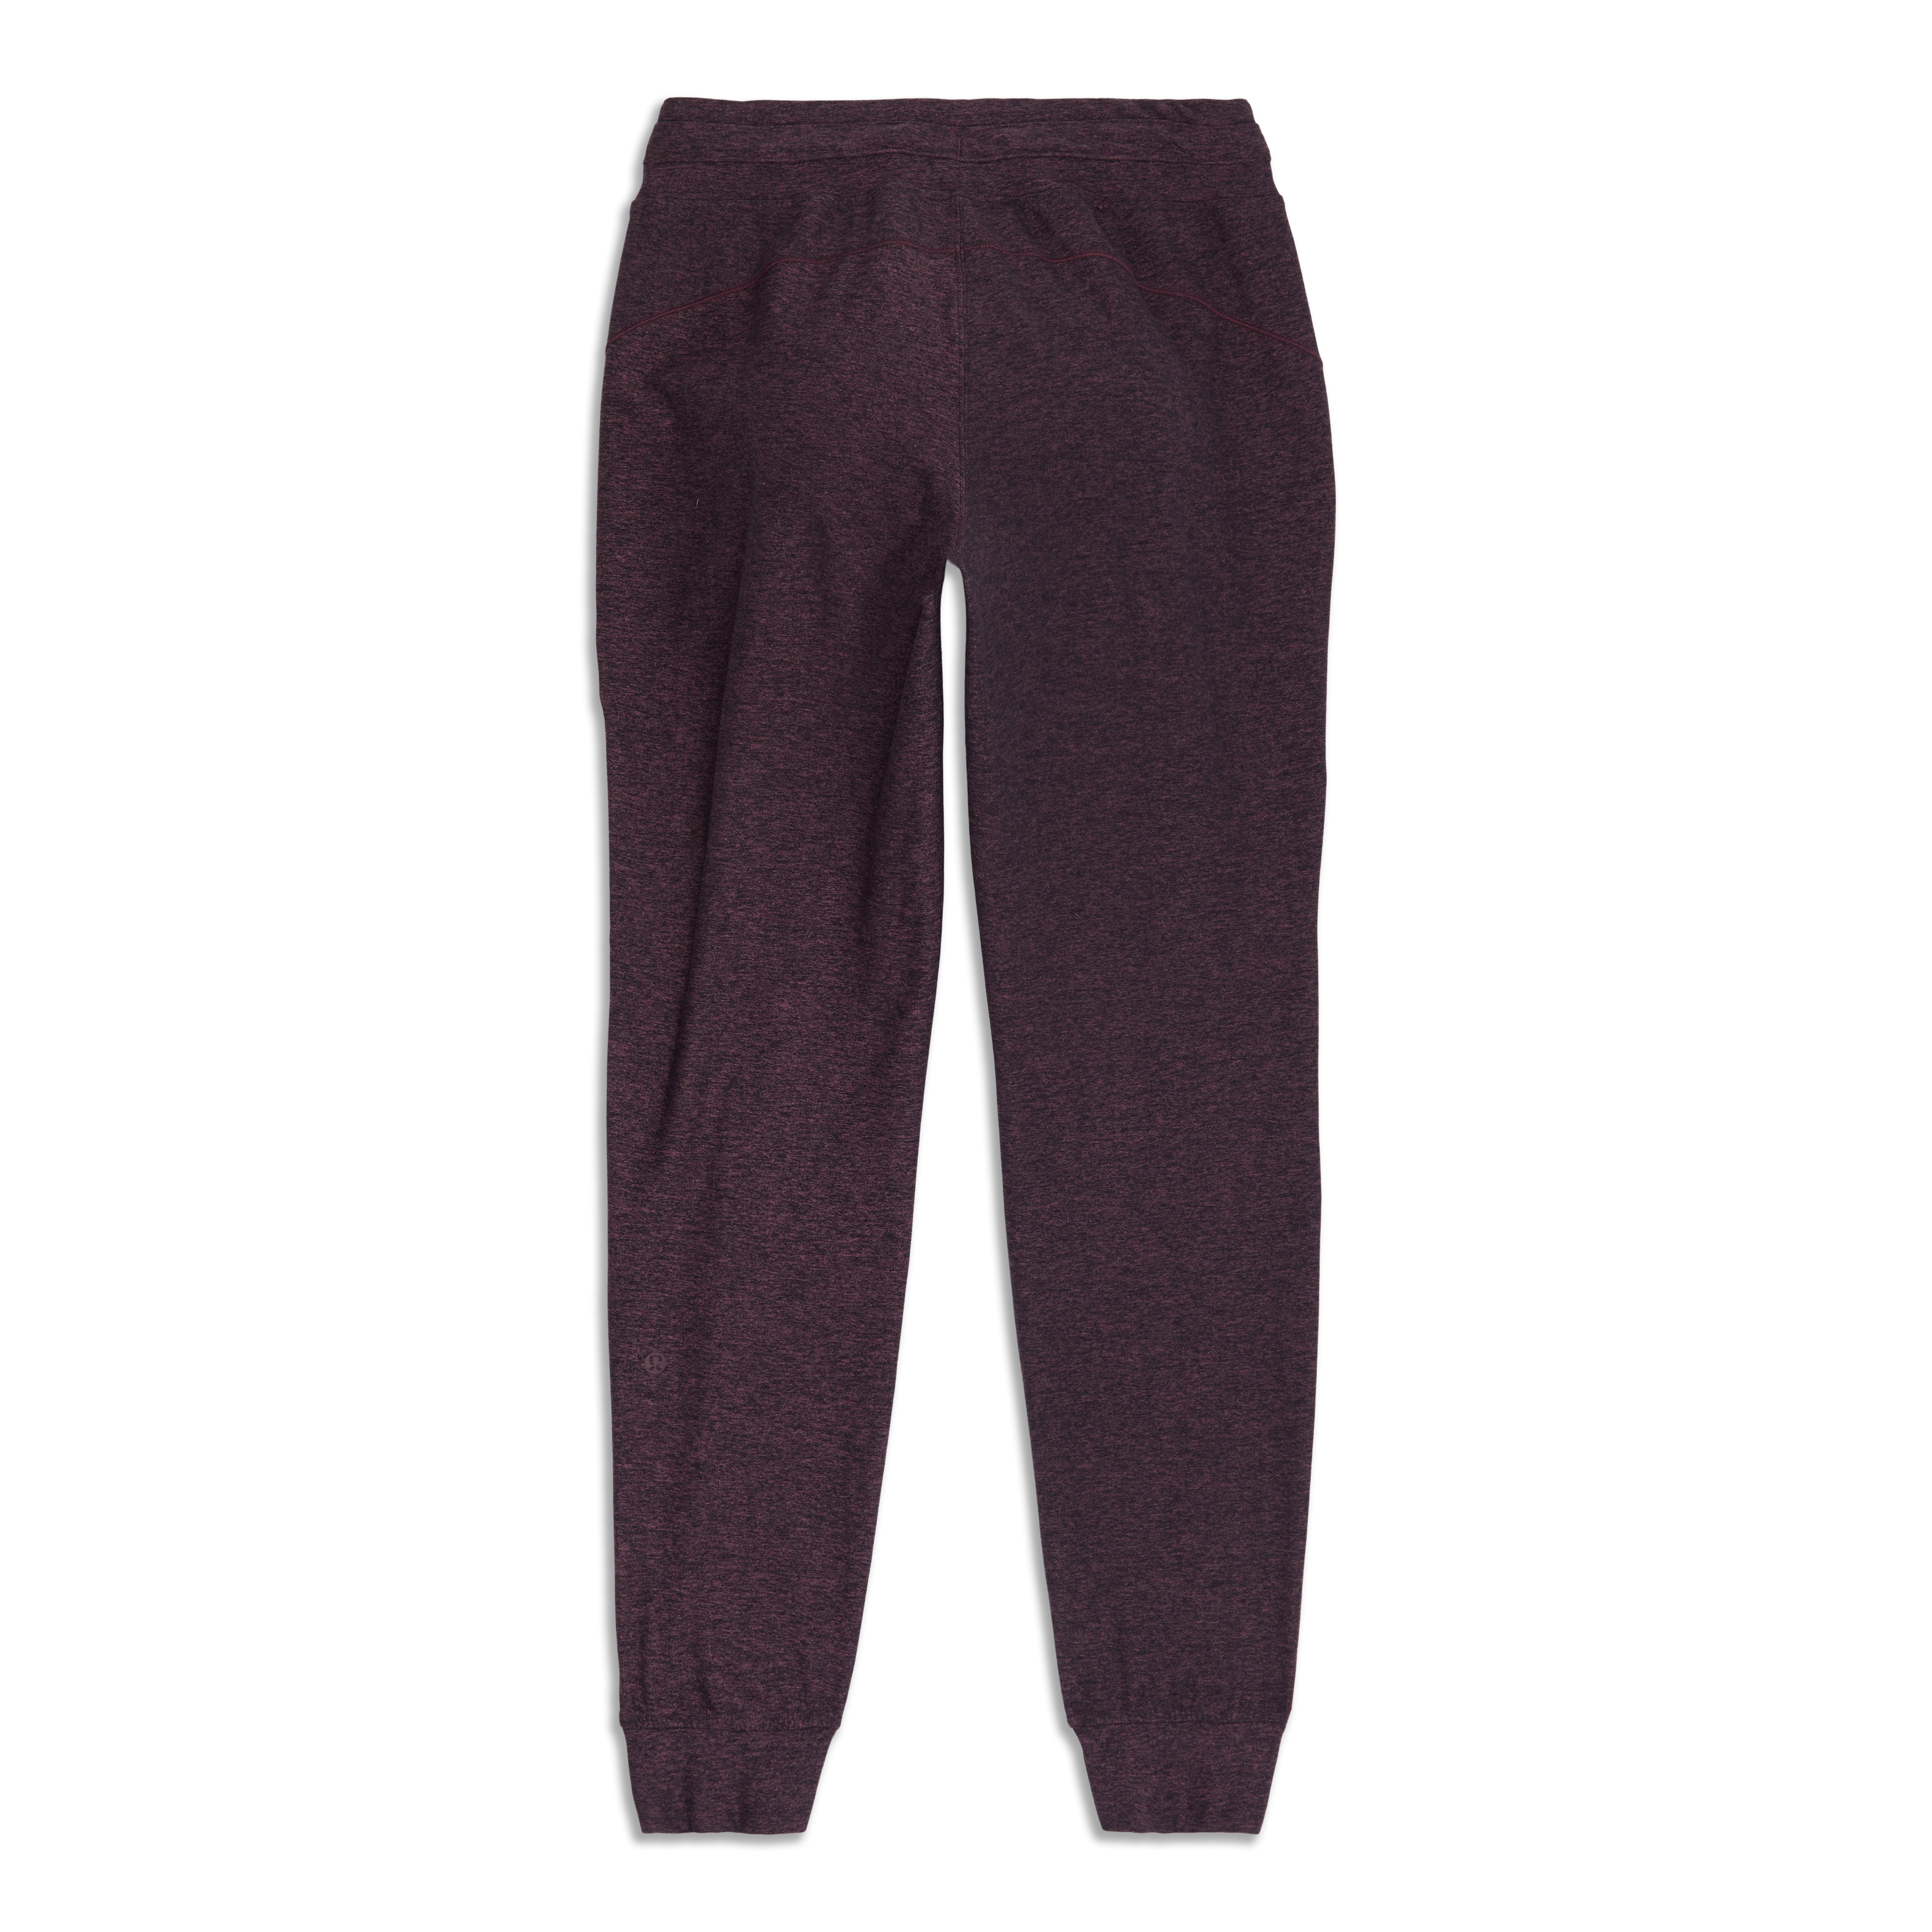 ready lulu > aligns? Hey! Do you guys prefer the ready to rulu pant over  the align joggers? I love the way my bottom looks in the aligns.. I wear  the aligns